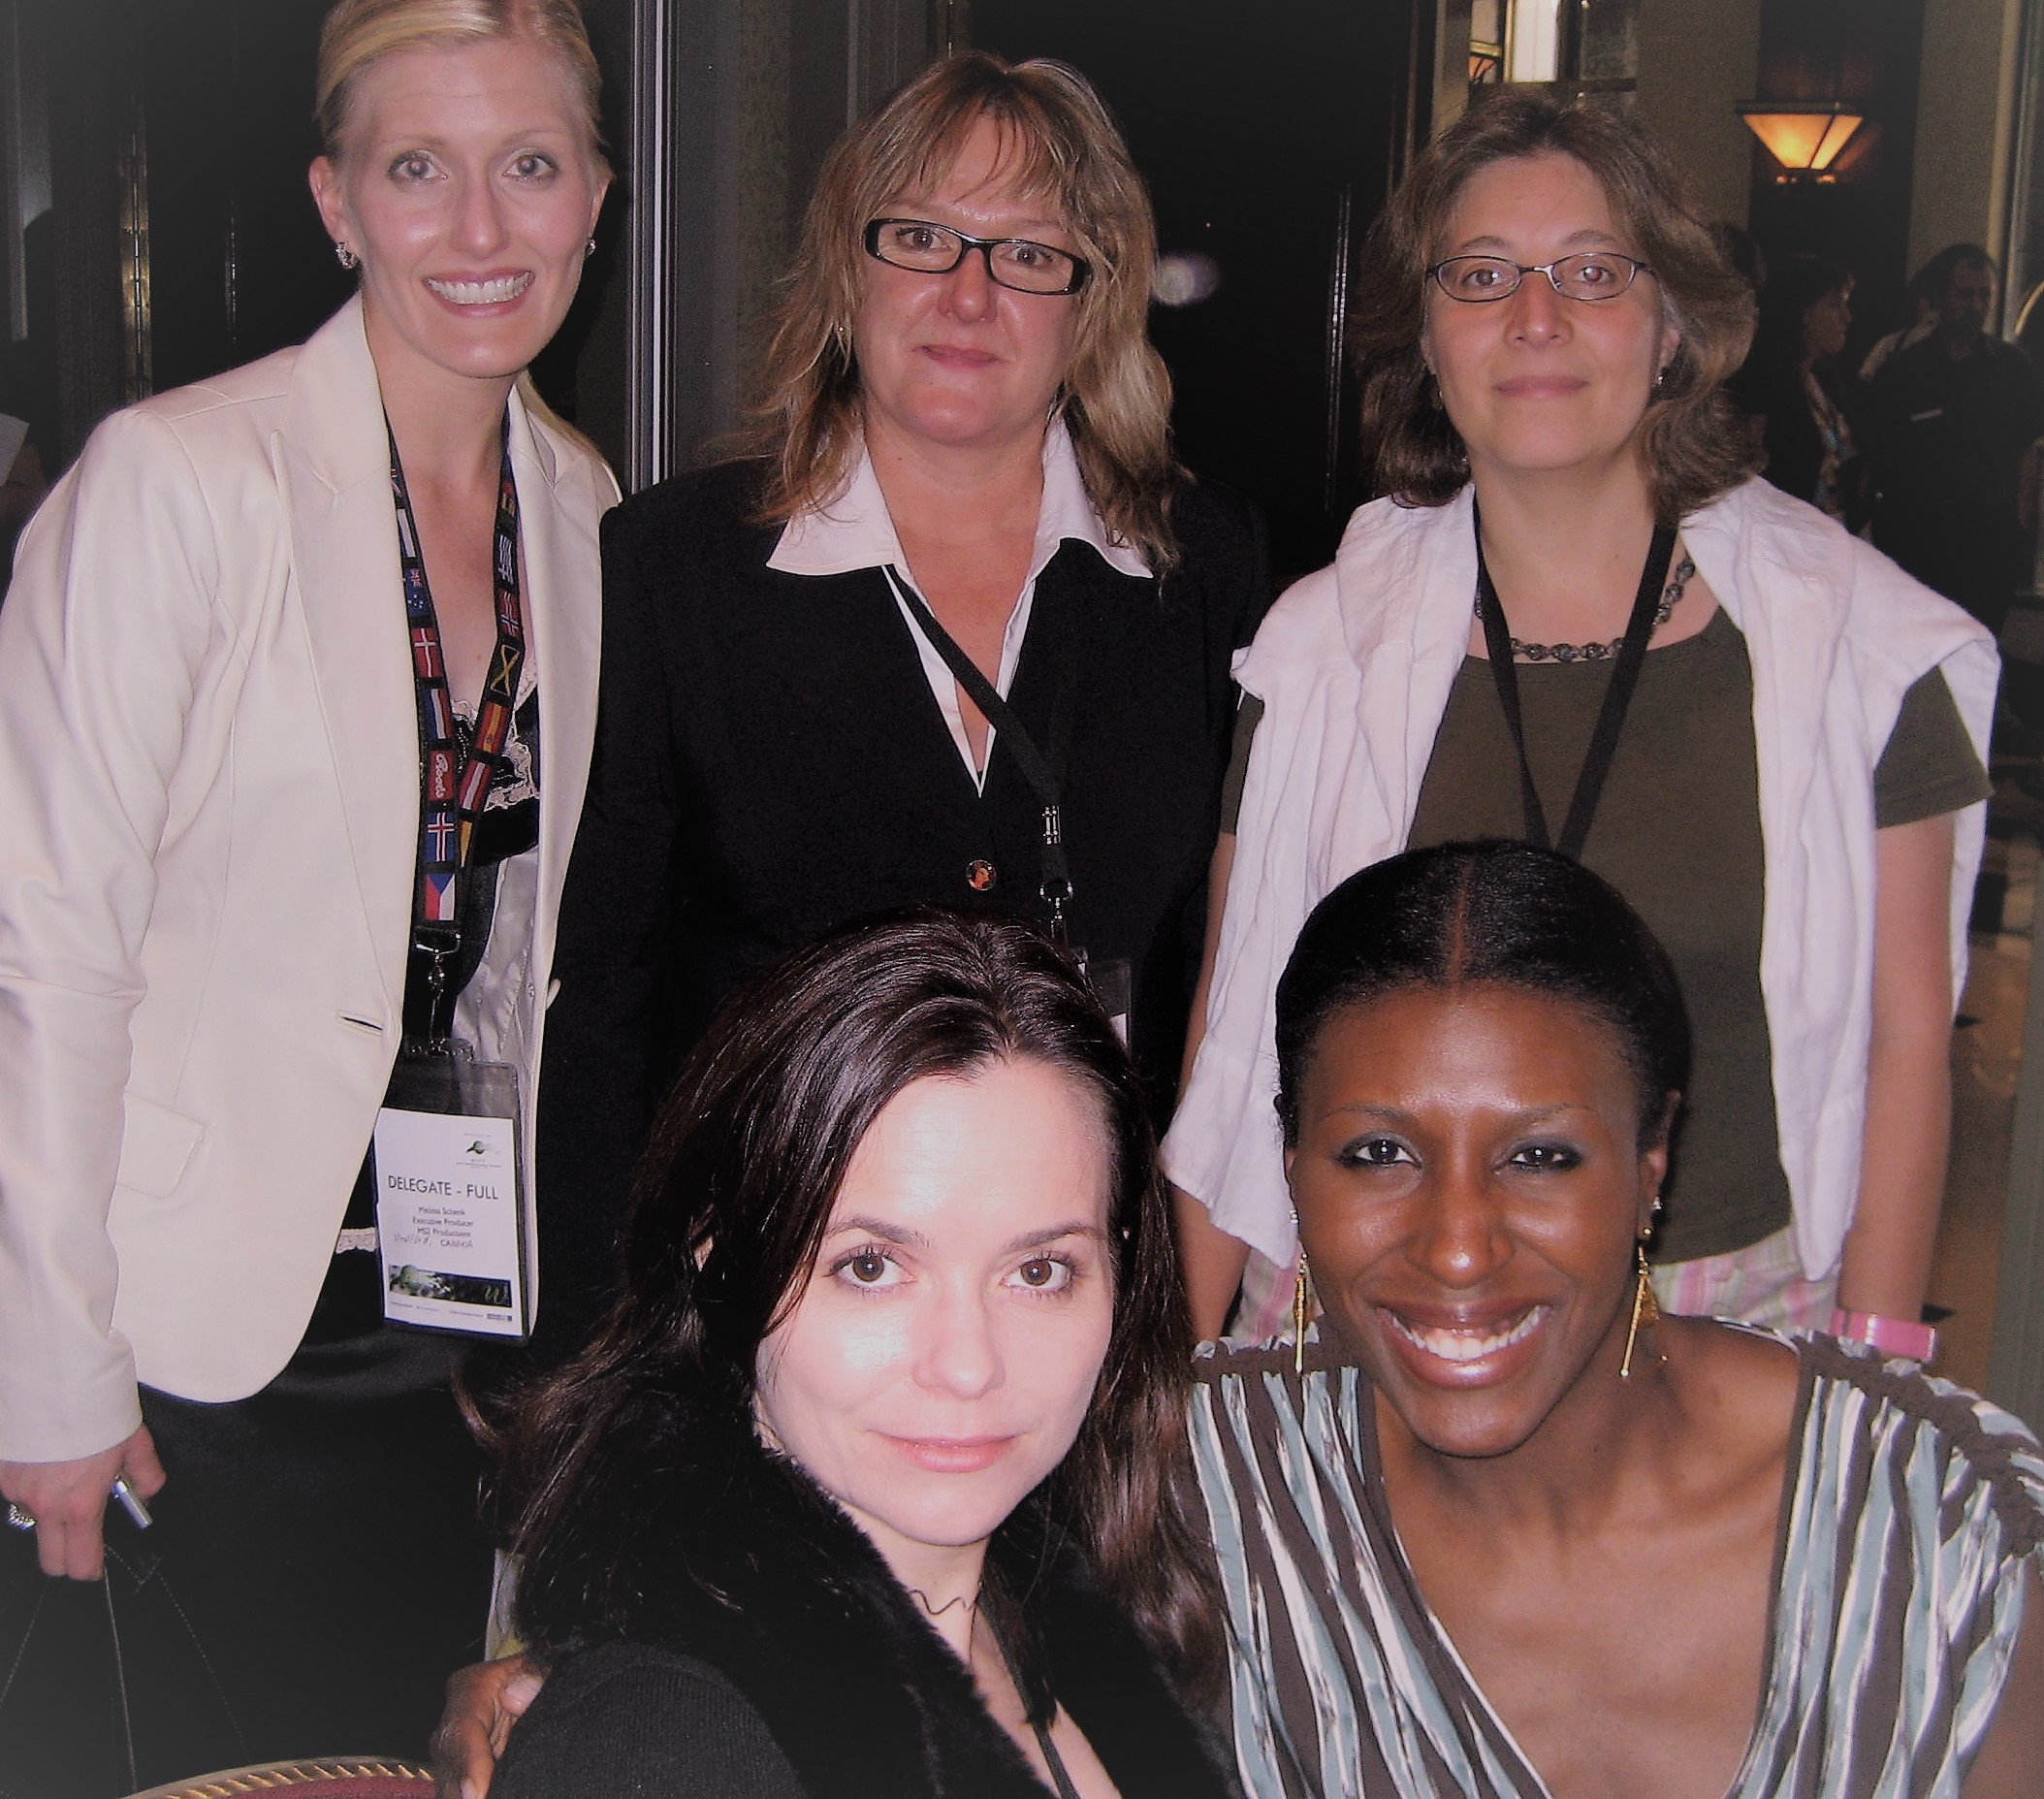 Richardson (bottom right) & guests at WIFTI Conference 2007